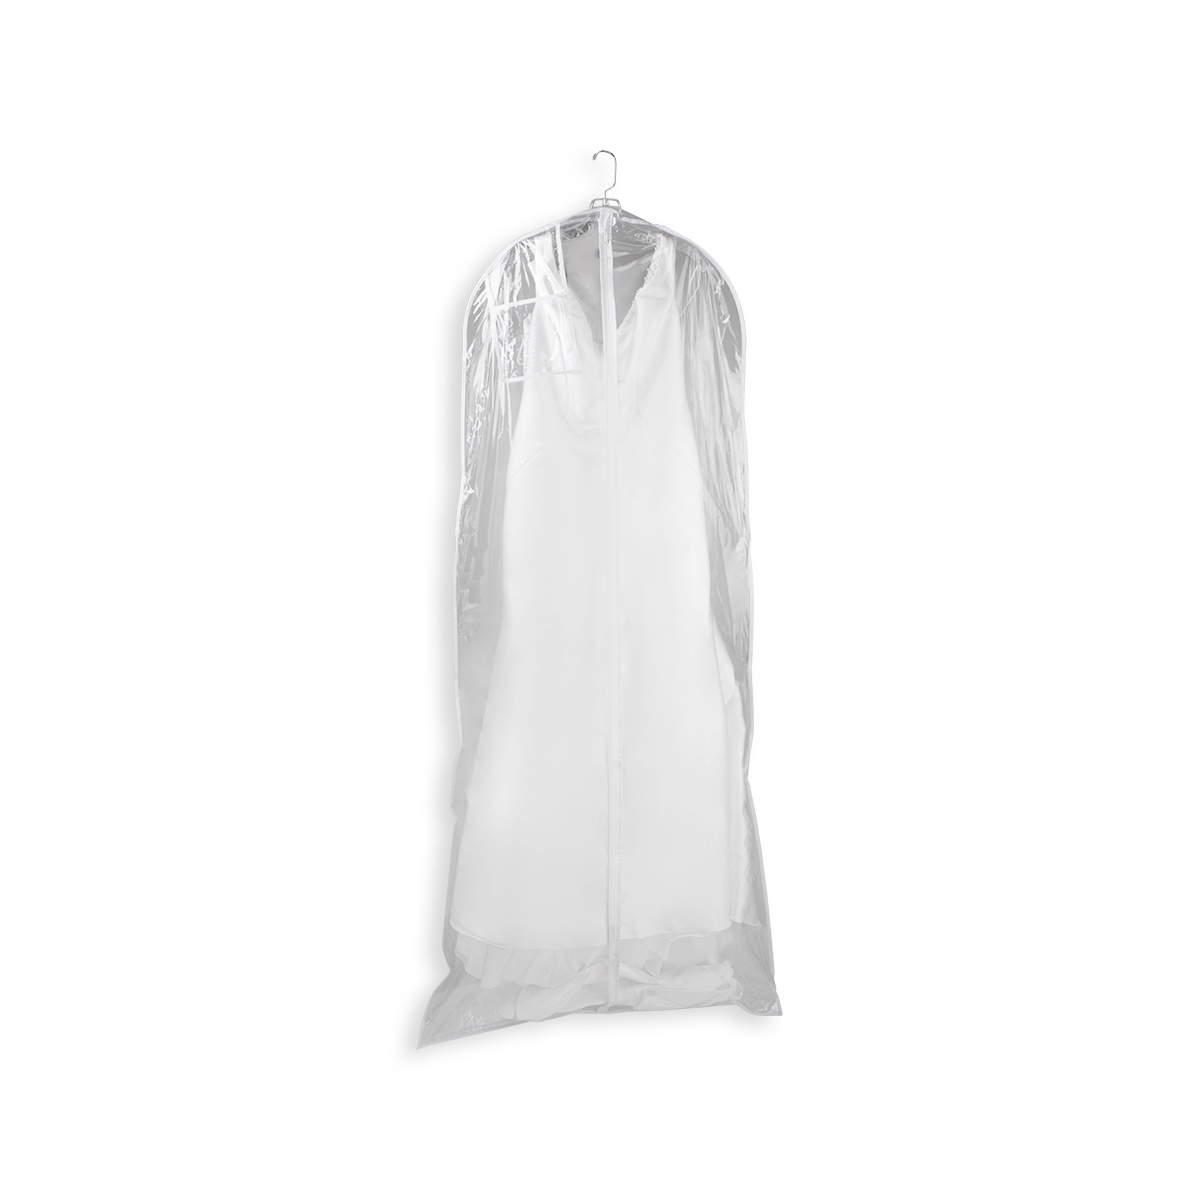 How to Choose a Garment Bag for Your Bridal Dress?